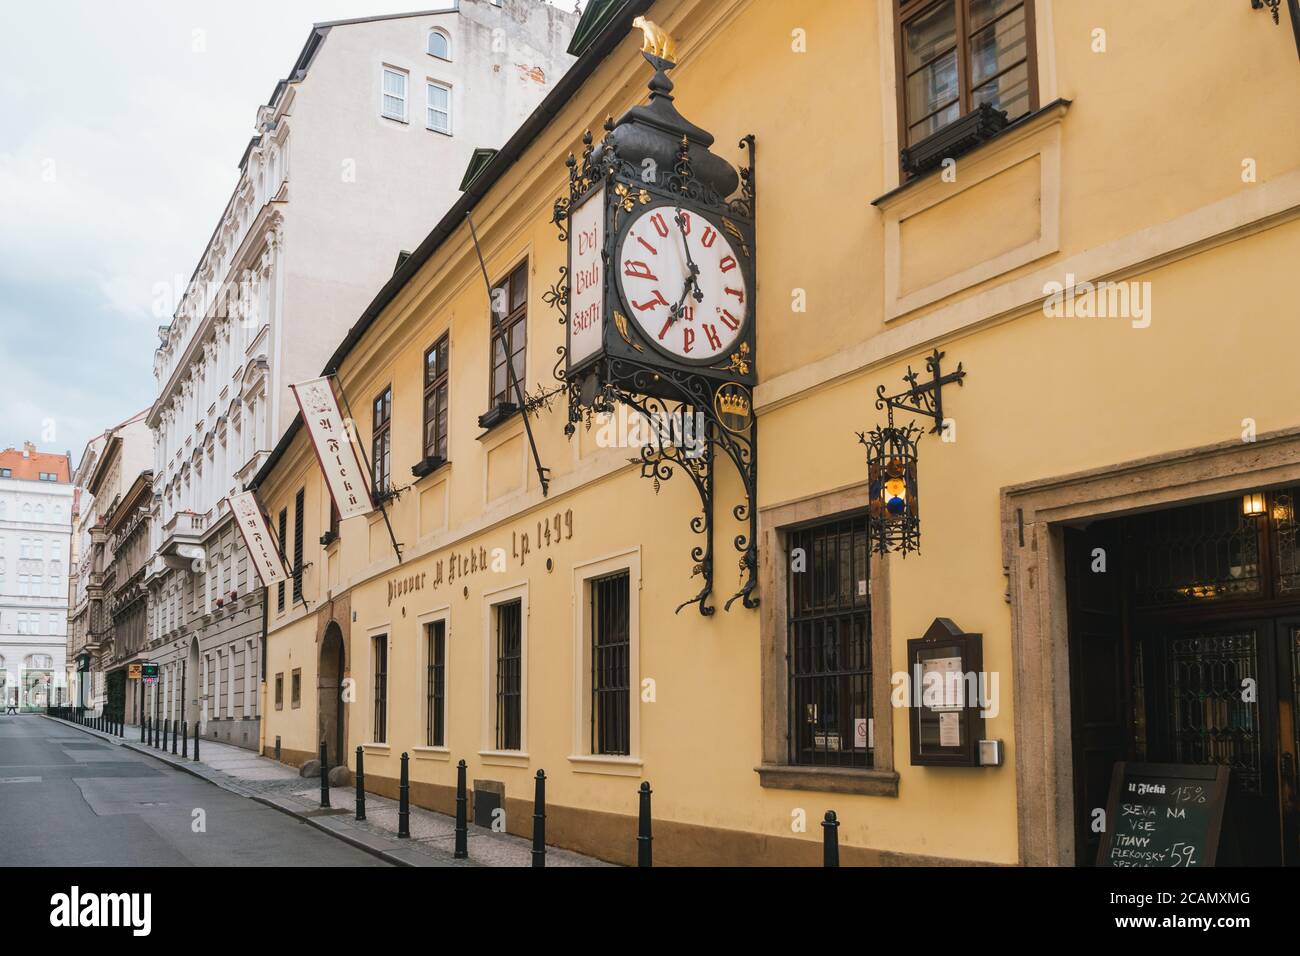 Prague, Czech Republic - July 10 2020: U Fleku Pivovar Restaurant, Beer Hall and Brewery Entrance with Clock. One o the Oldest Pubs in Prague Old Town Stock Photo